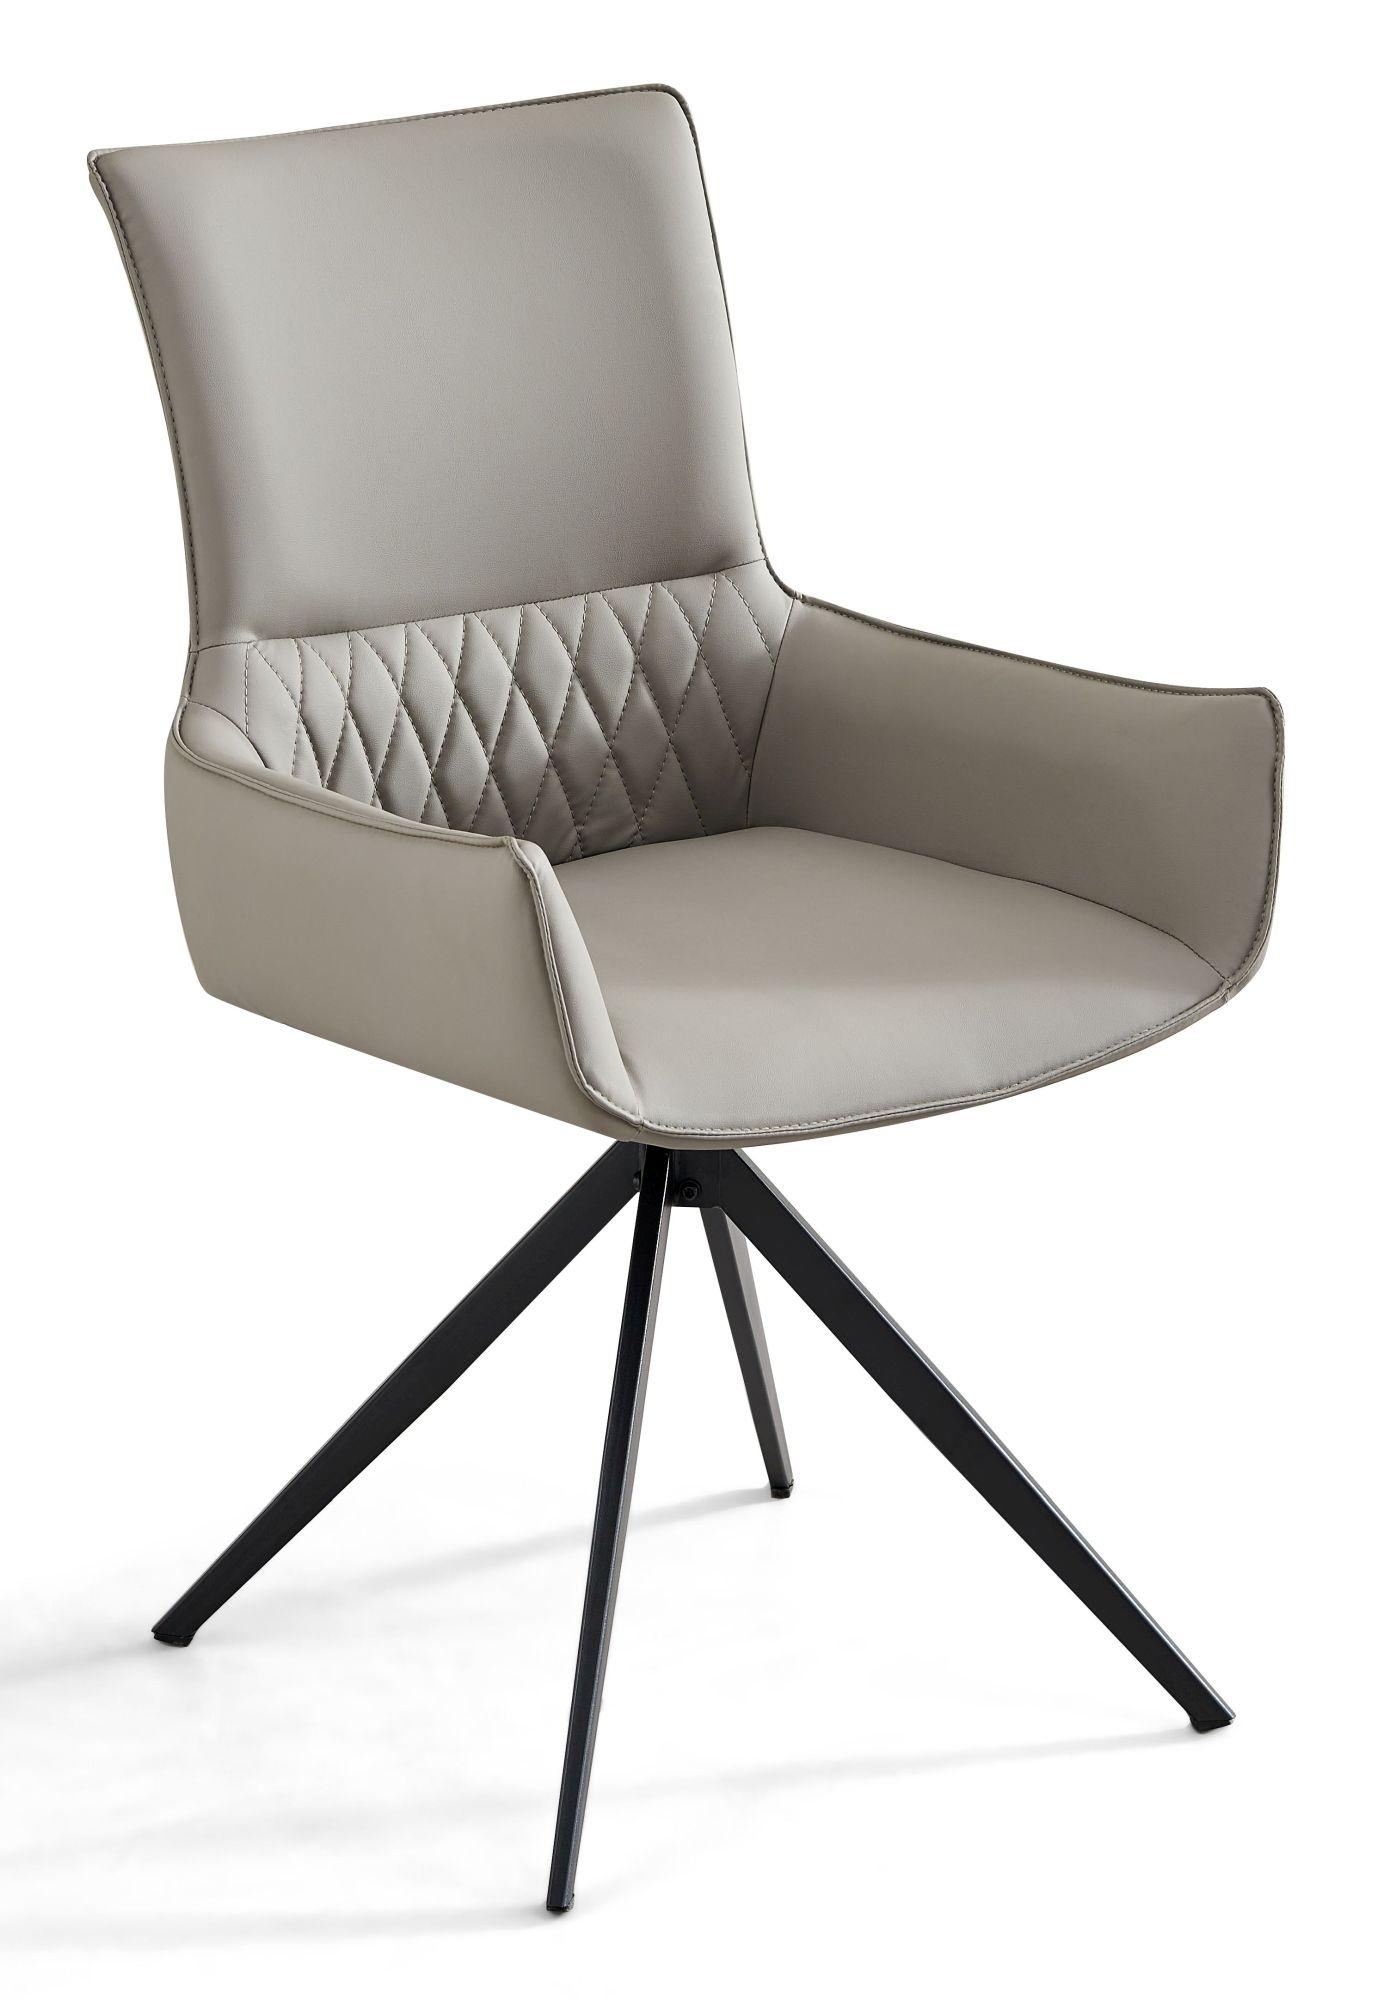 Chicago Dark Grey Faux Leather Swivel Dining Chair with Black Legs